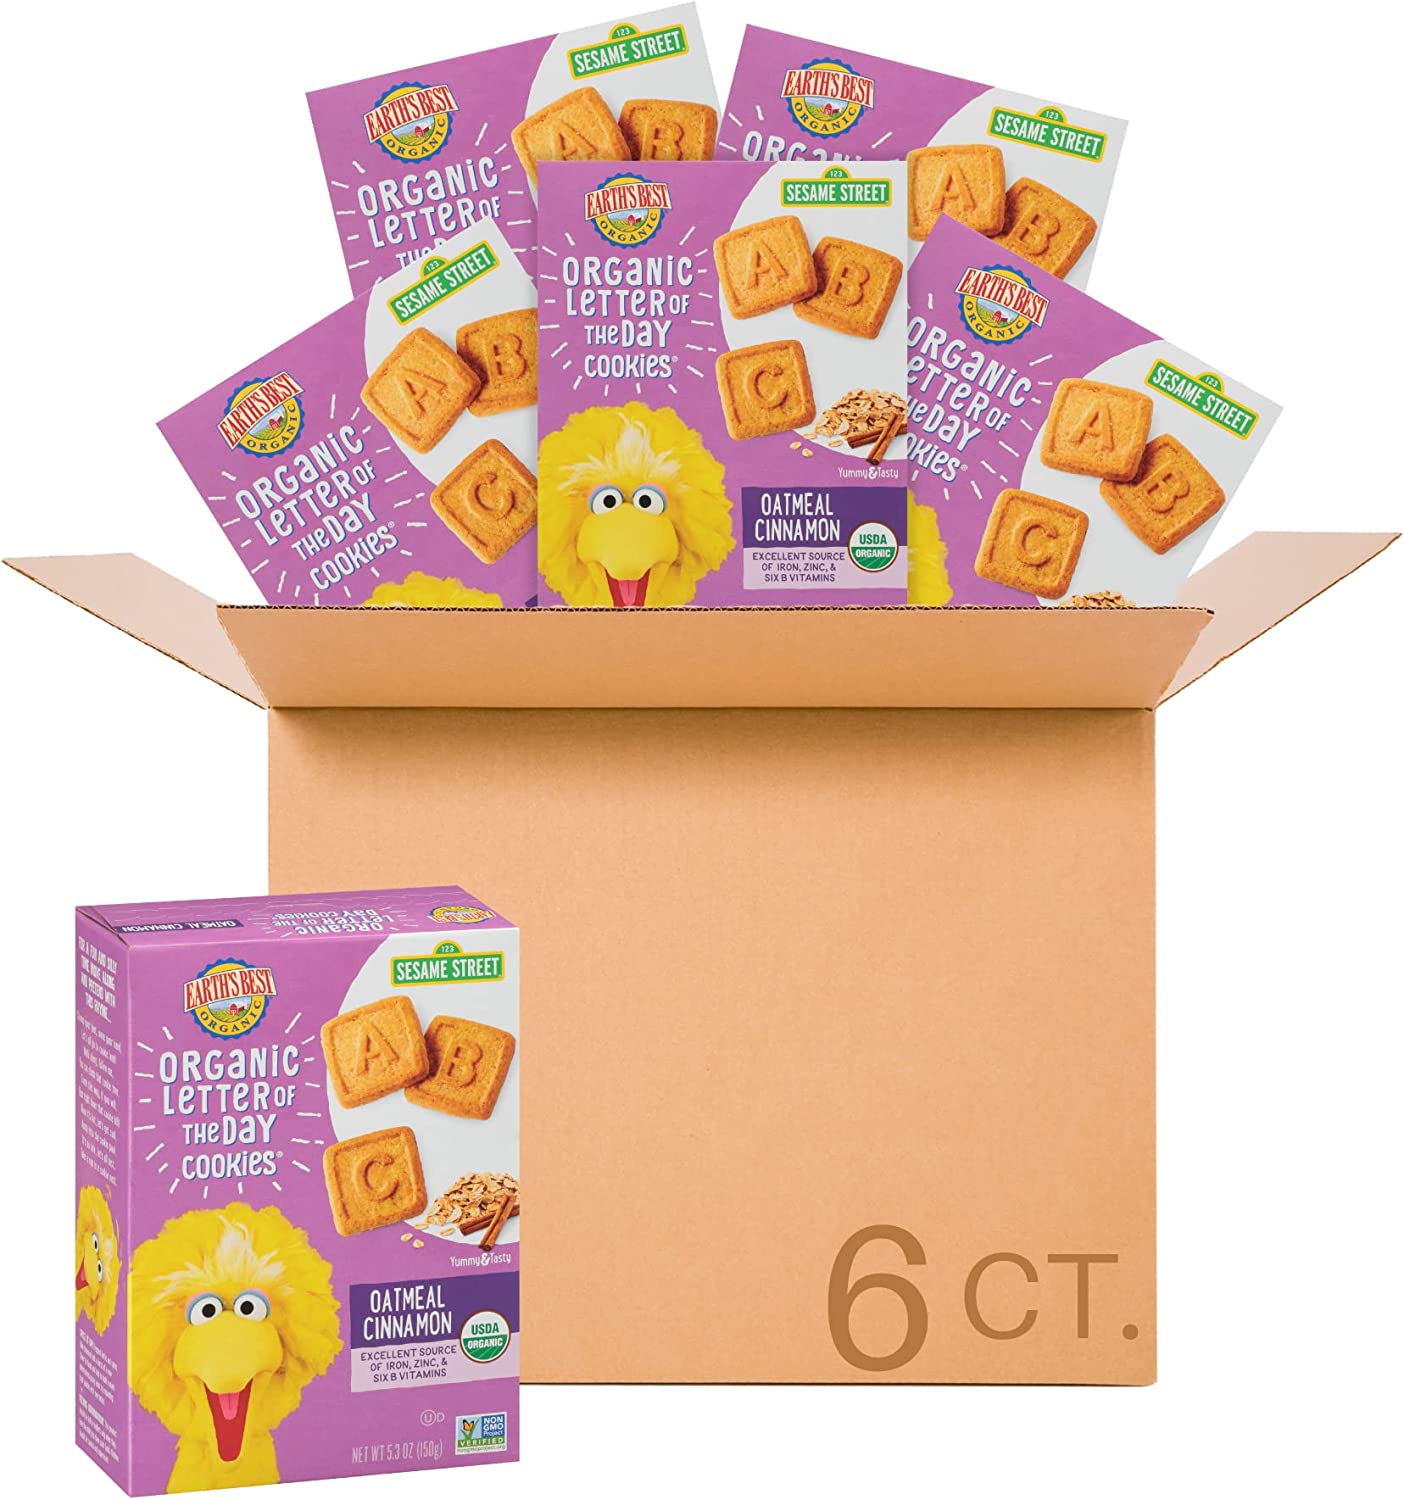 Earth’s Best Organic Kids Snacks, Sesame Street Toddler Snacks, Organic Letter of the Day Cookies for Toddlers 2 Years and Older, Oatmeal Cinnamon, 5.3 oz Box (Pack of 6)